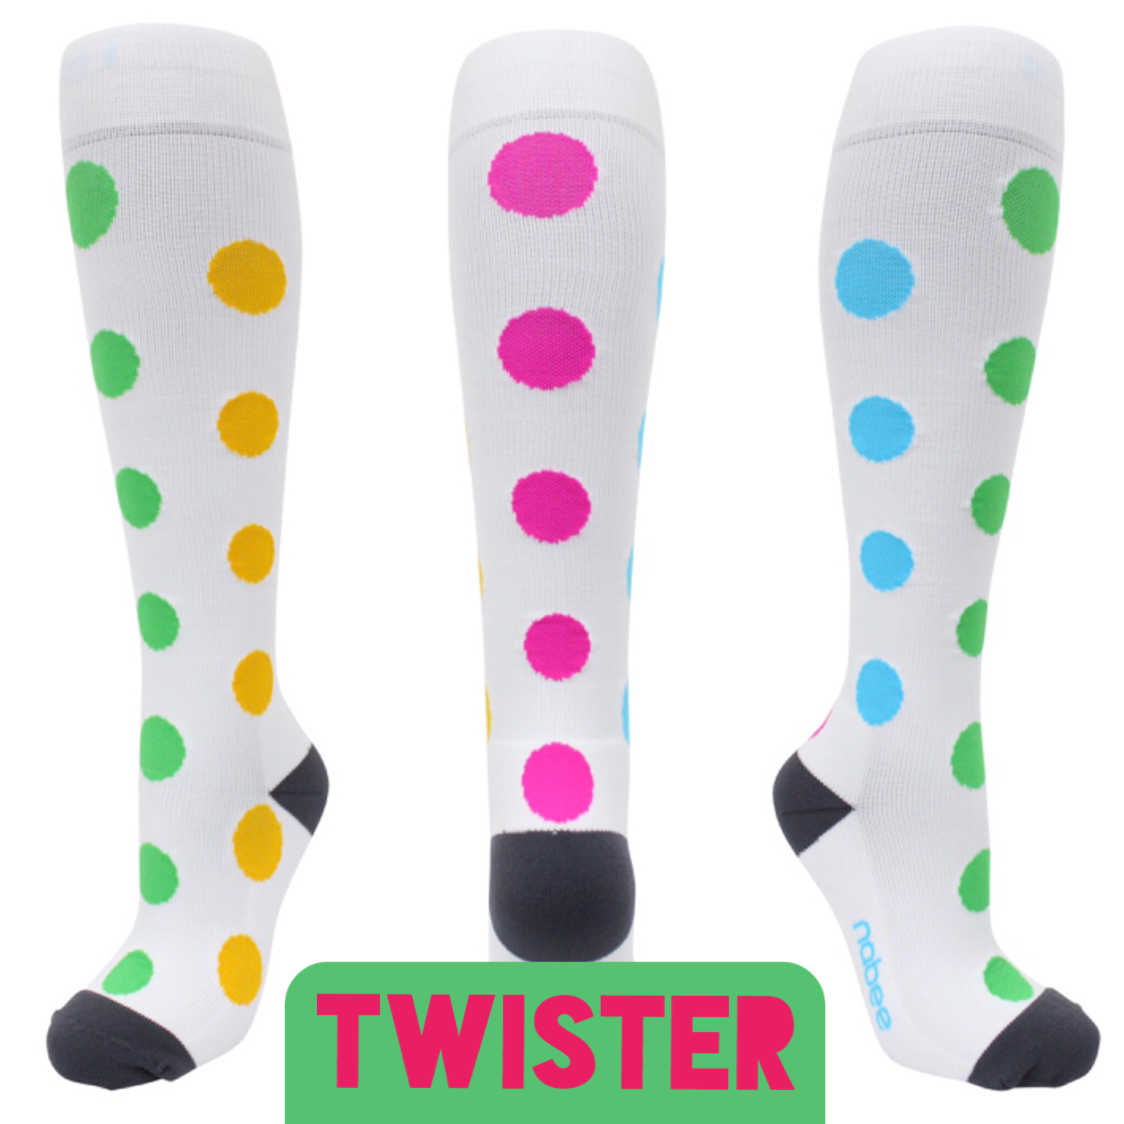 Twister Compression Socks from Nabee